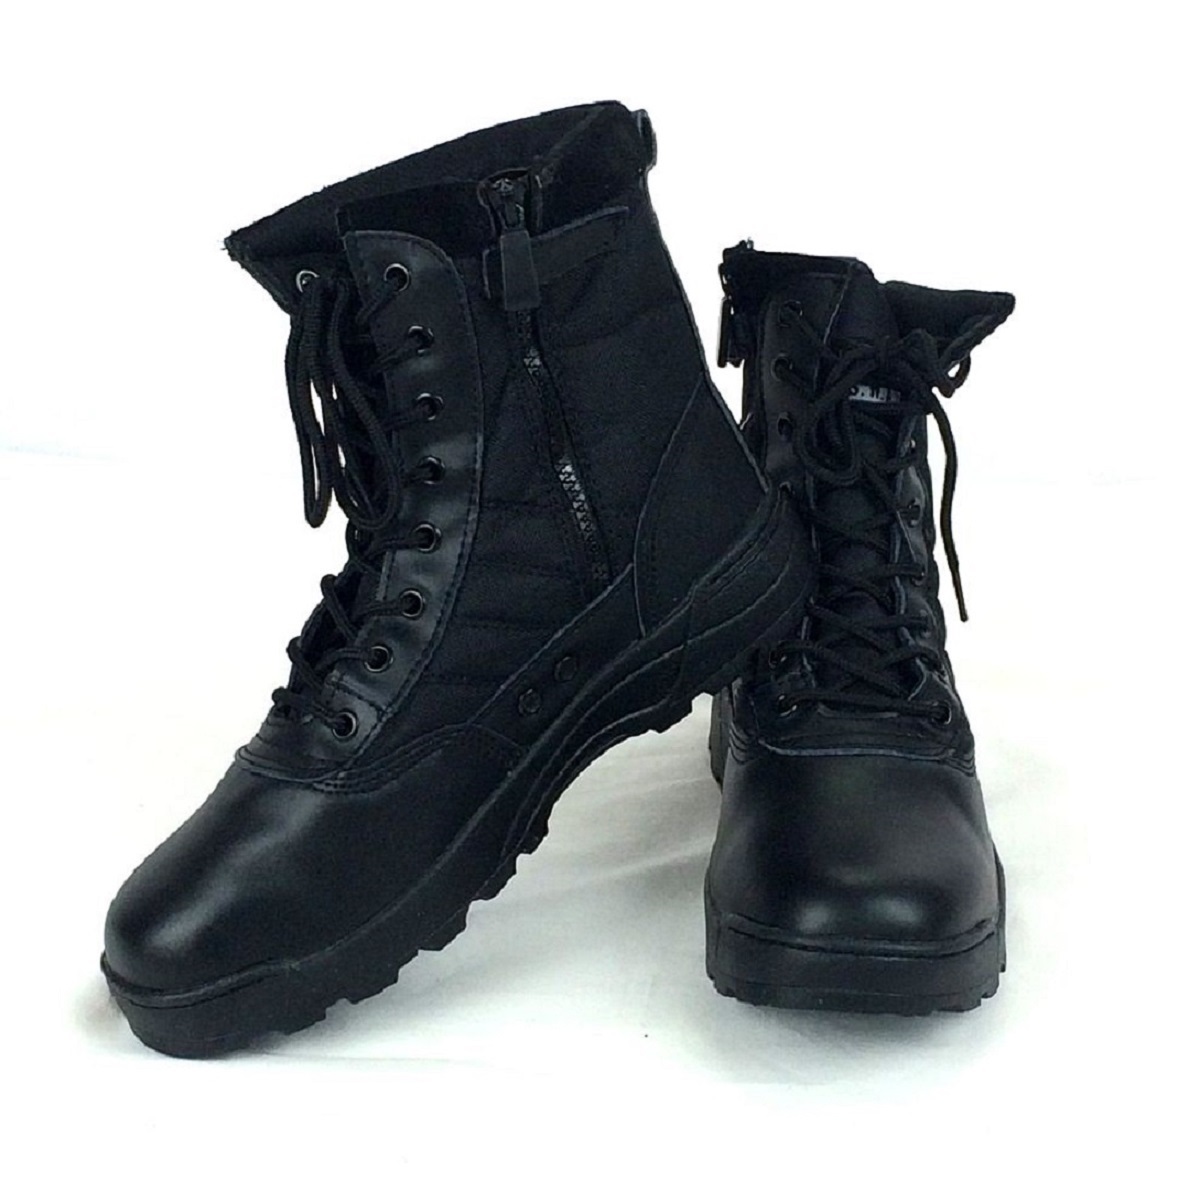  military boots Tacty karu boots combat boots rider boots work shoes shoes side zipper mackerel ge men's boots BK 25.5cm